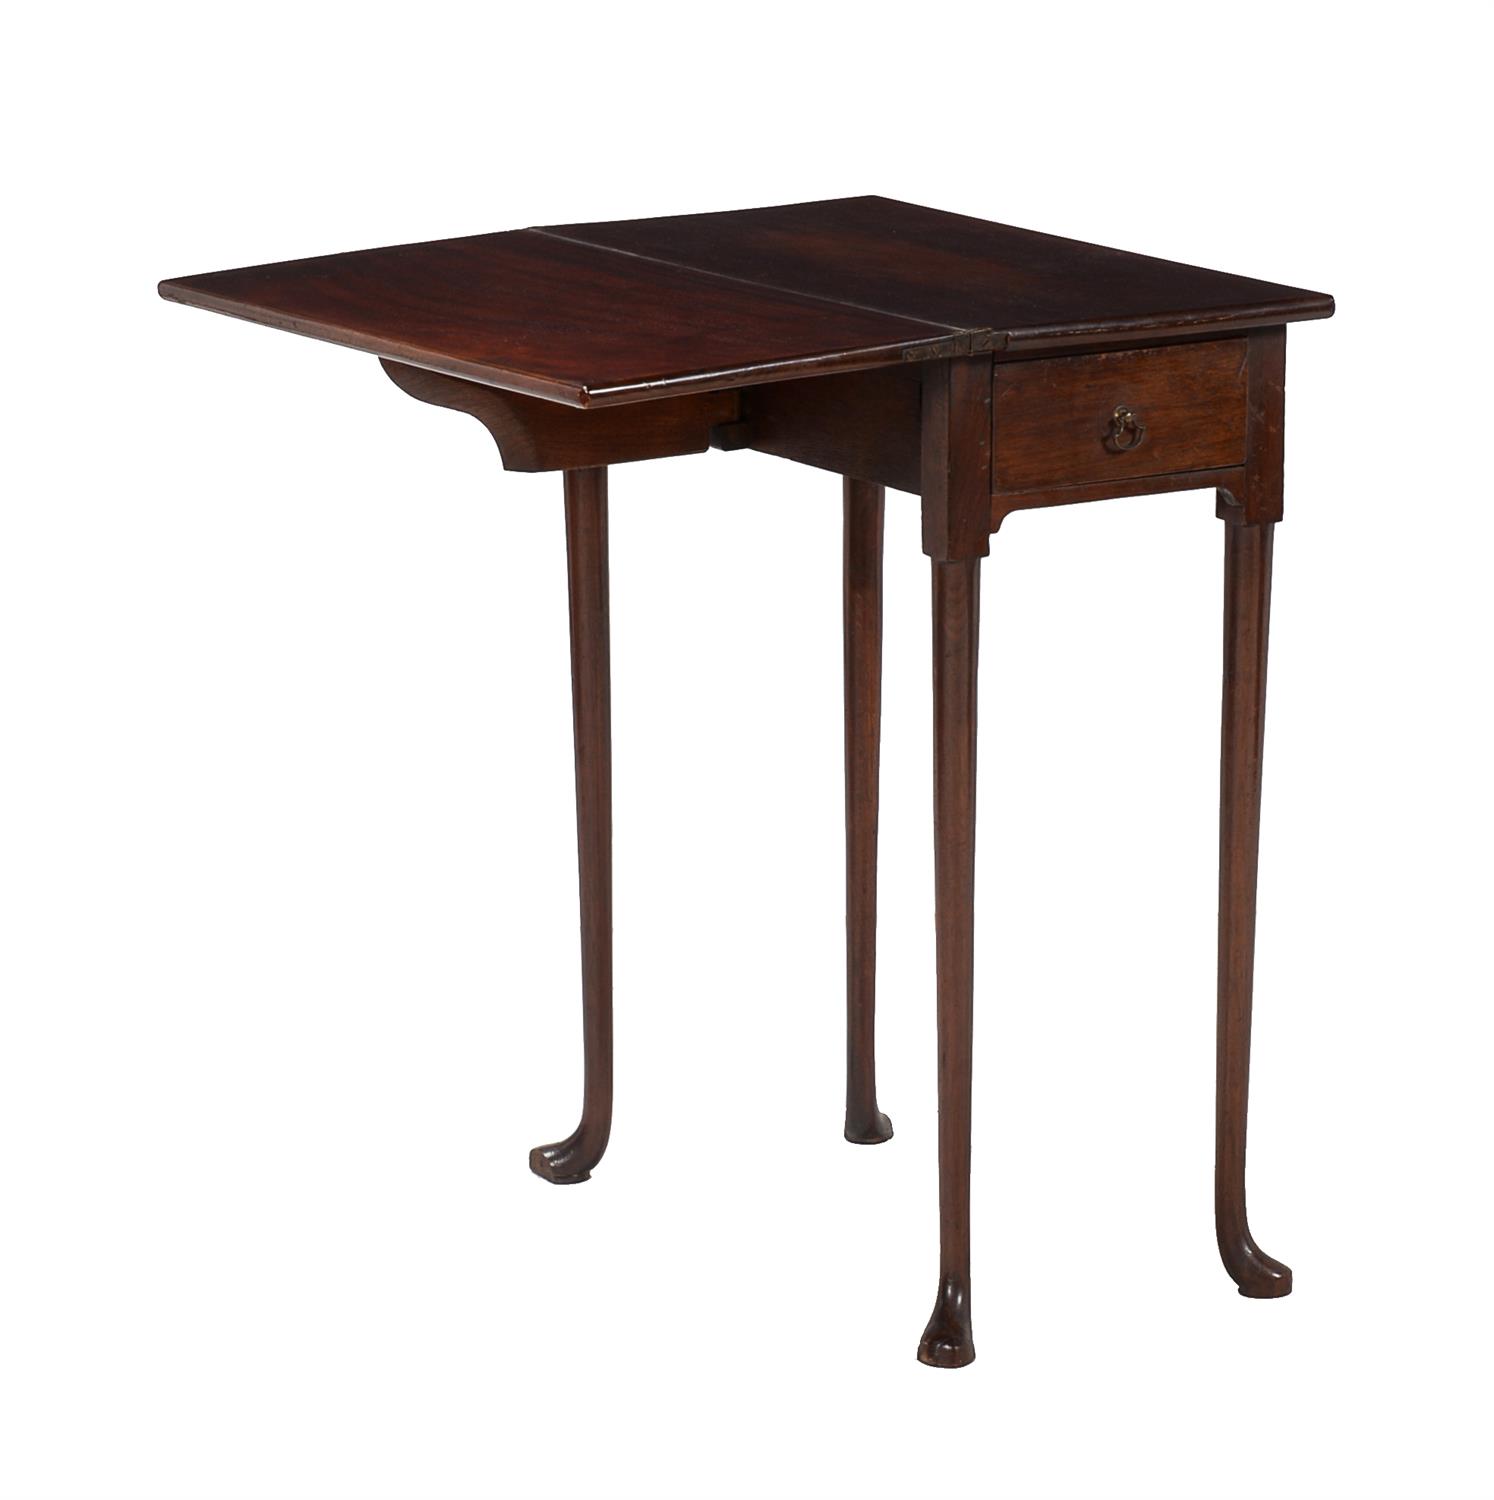 A mahogany patience table in George II style